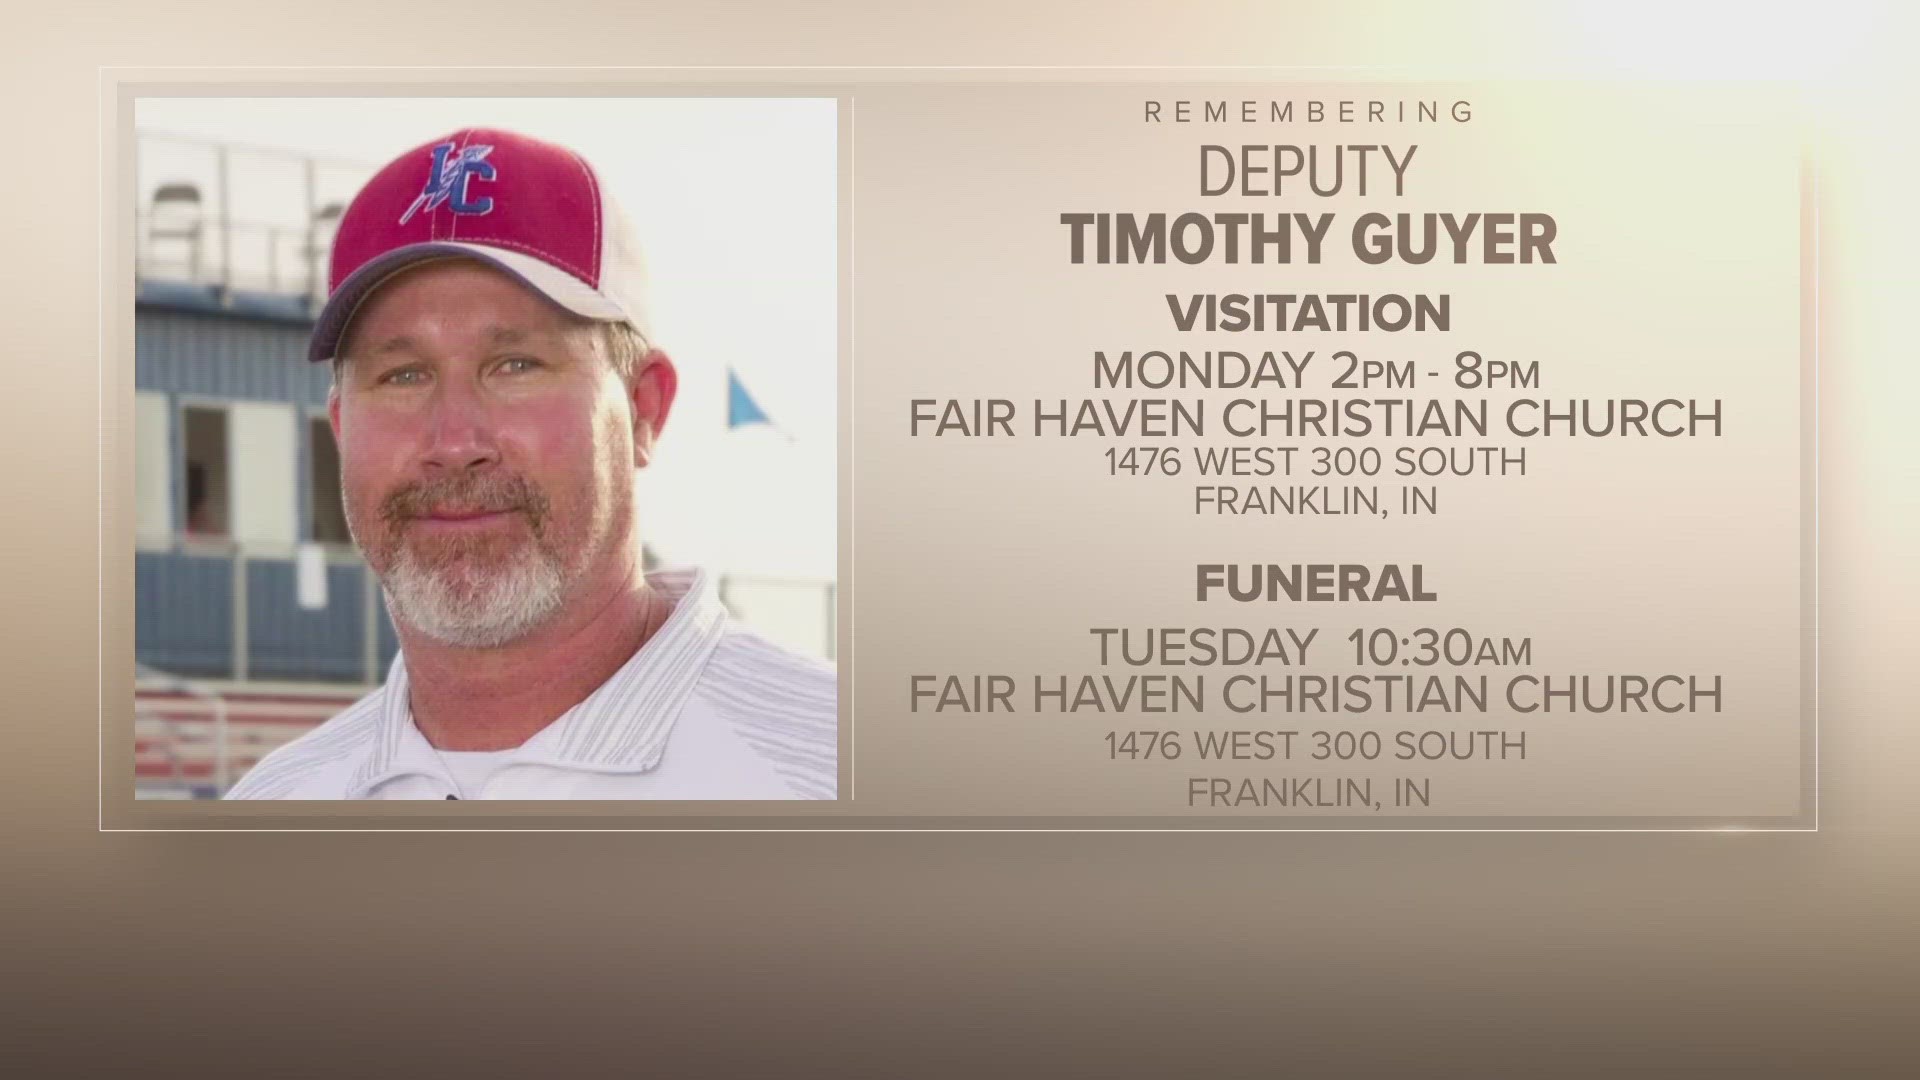 The visitation for Deputy Tim Guyer is taking place right now at Fair Haven Christian Church in Franklin.